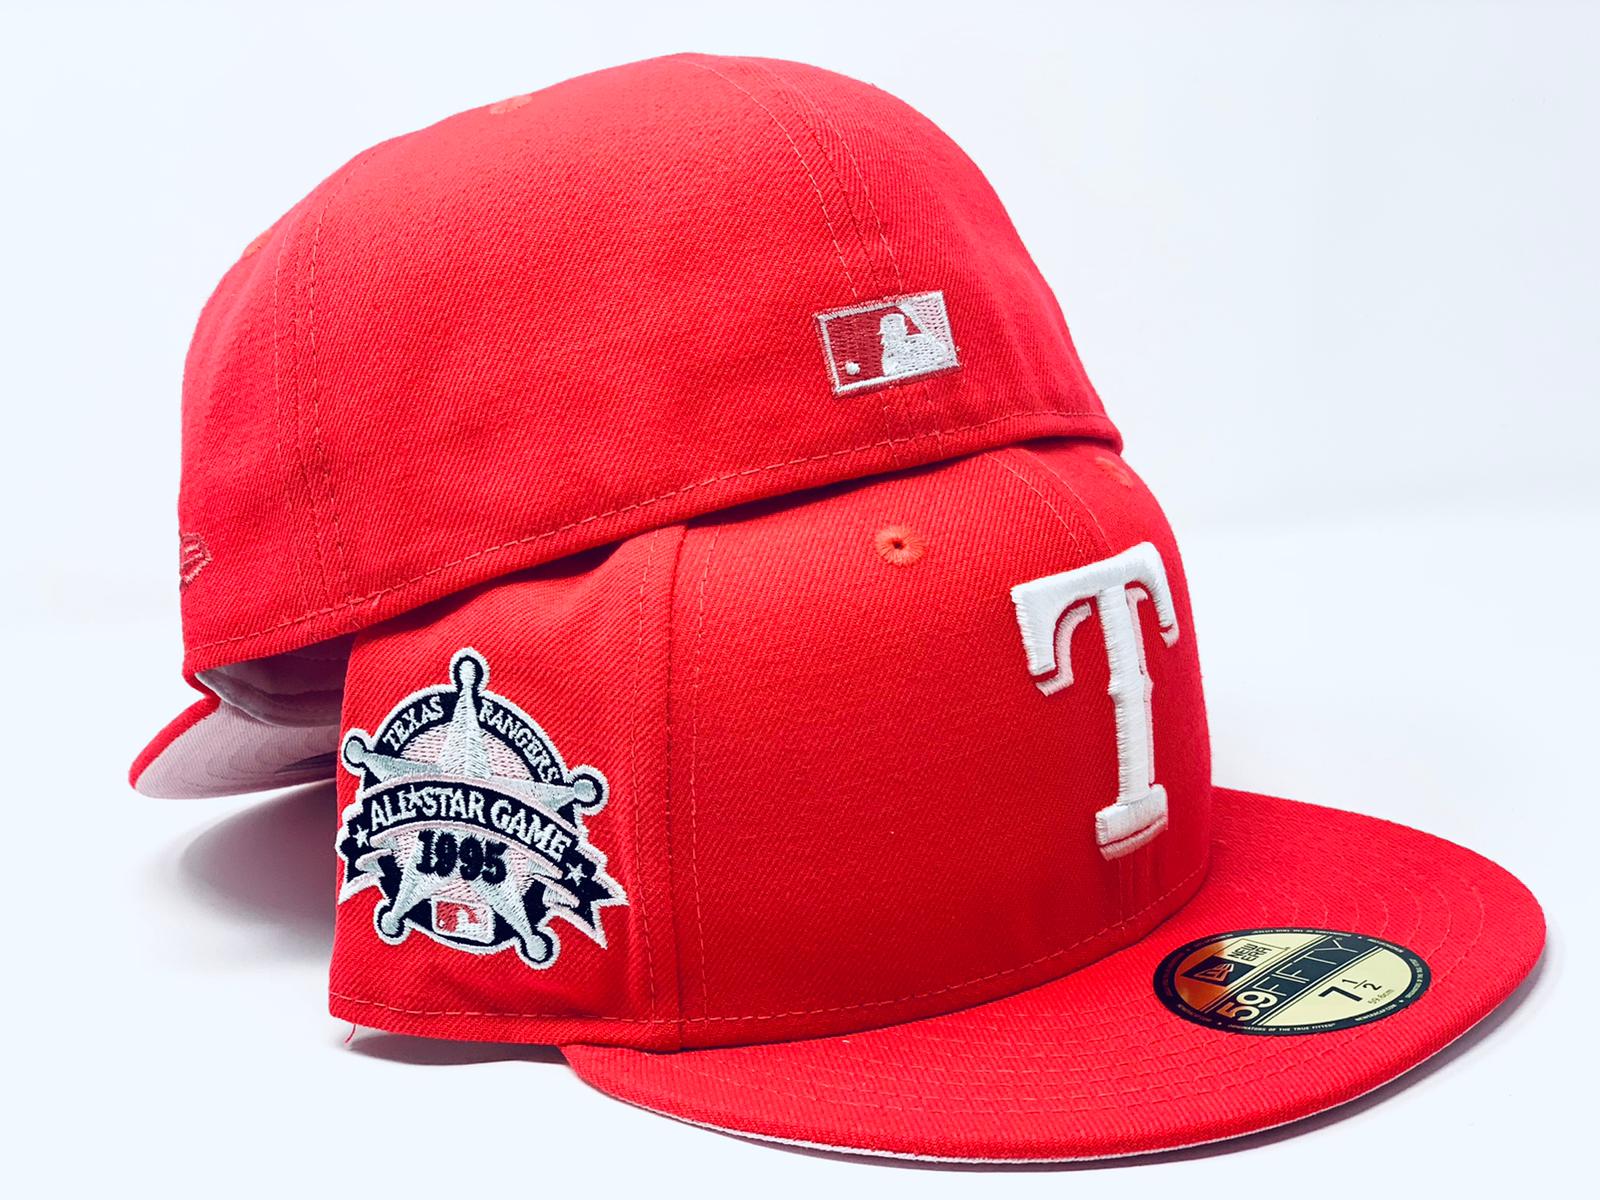 TEXAS RANGERS 1995 ALL STAR GAME INFRARED PINK BRIM NEW ERA FITTED